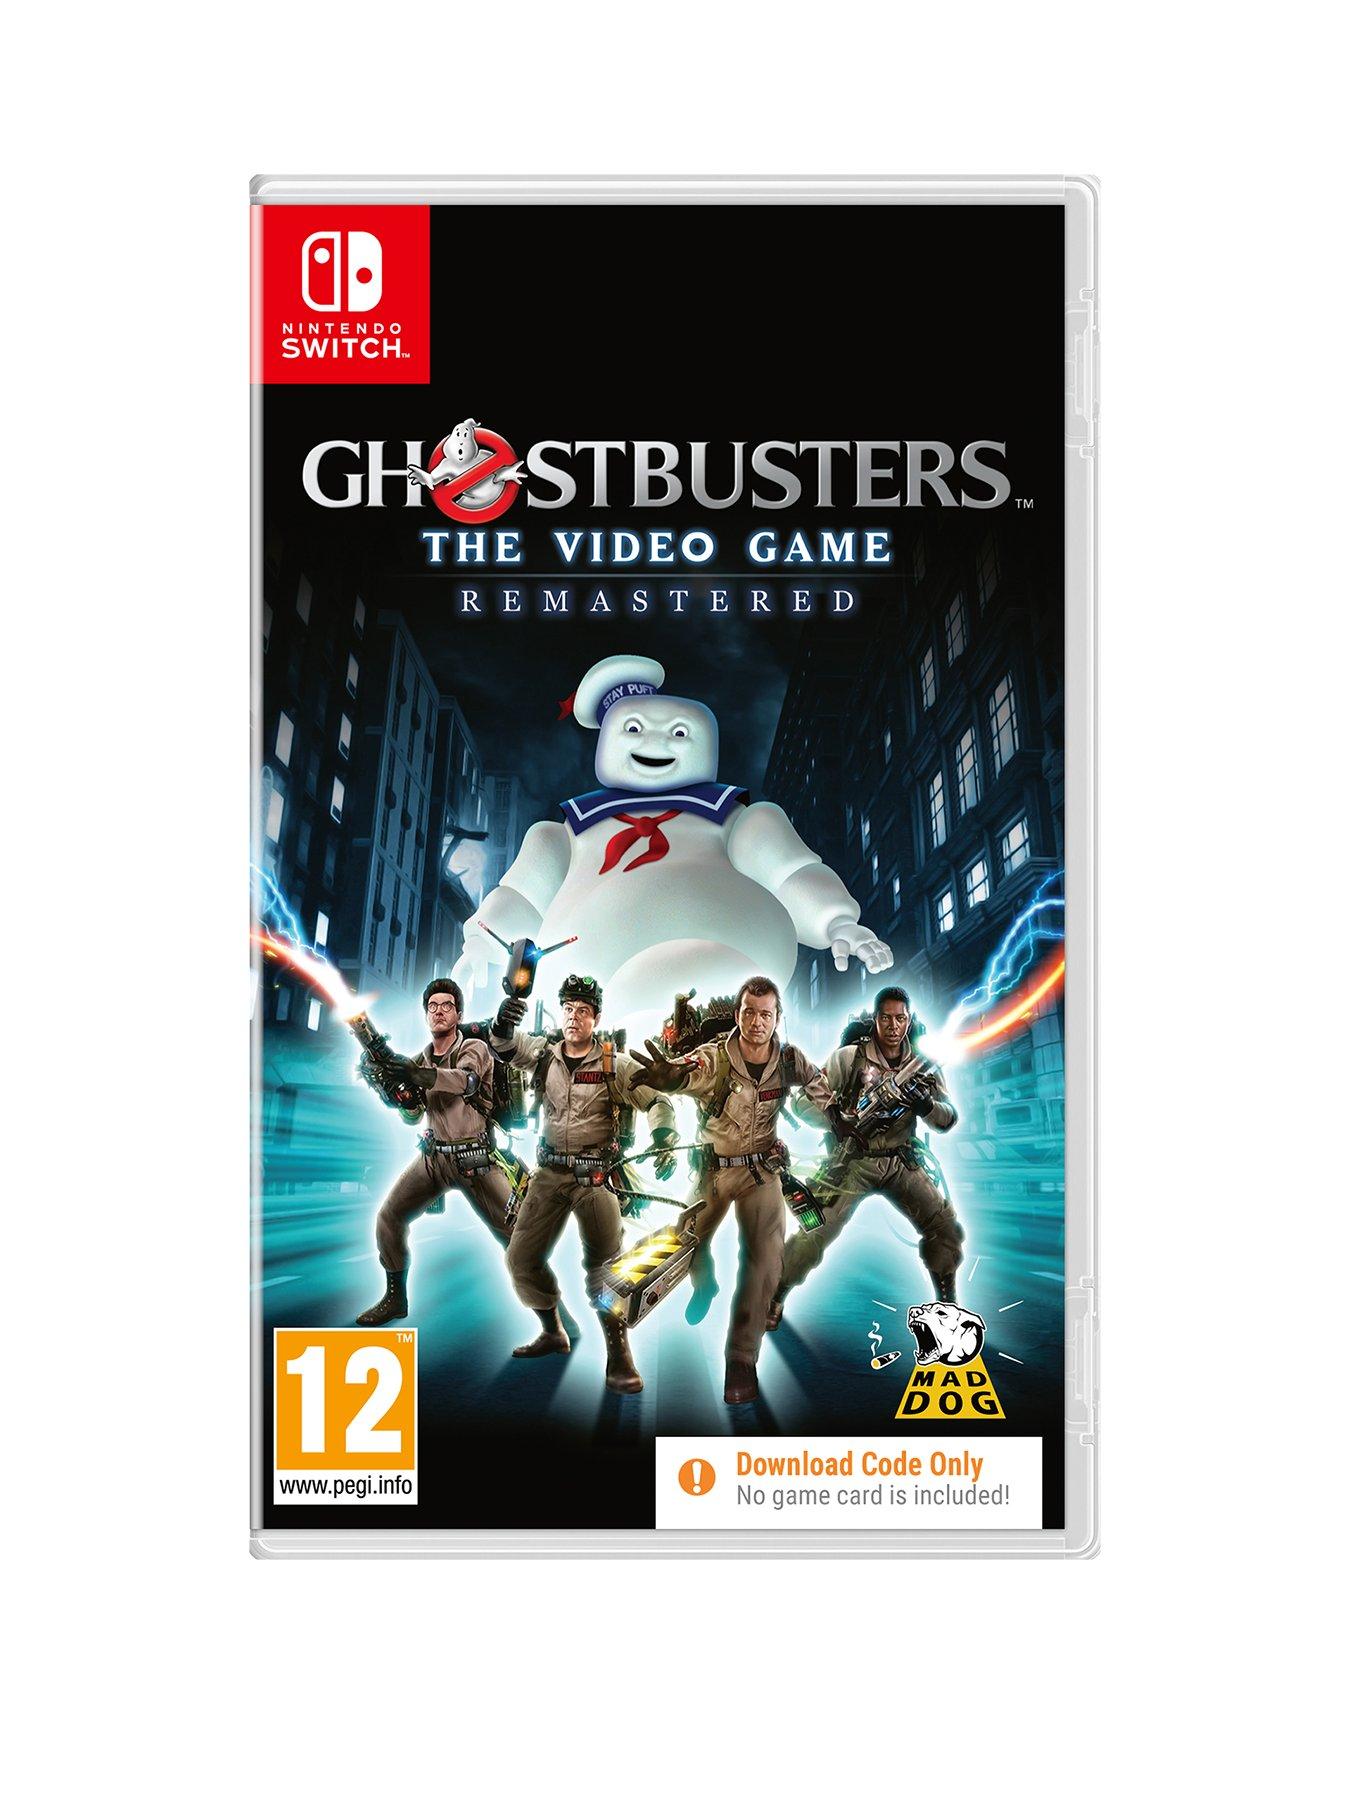 Nintendo Switch Lite Ghostbusters The Video Game: Remastered | very.co.uk